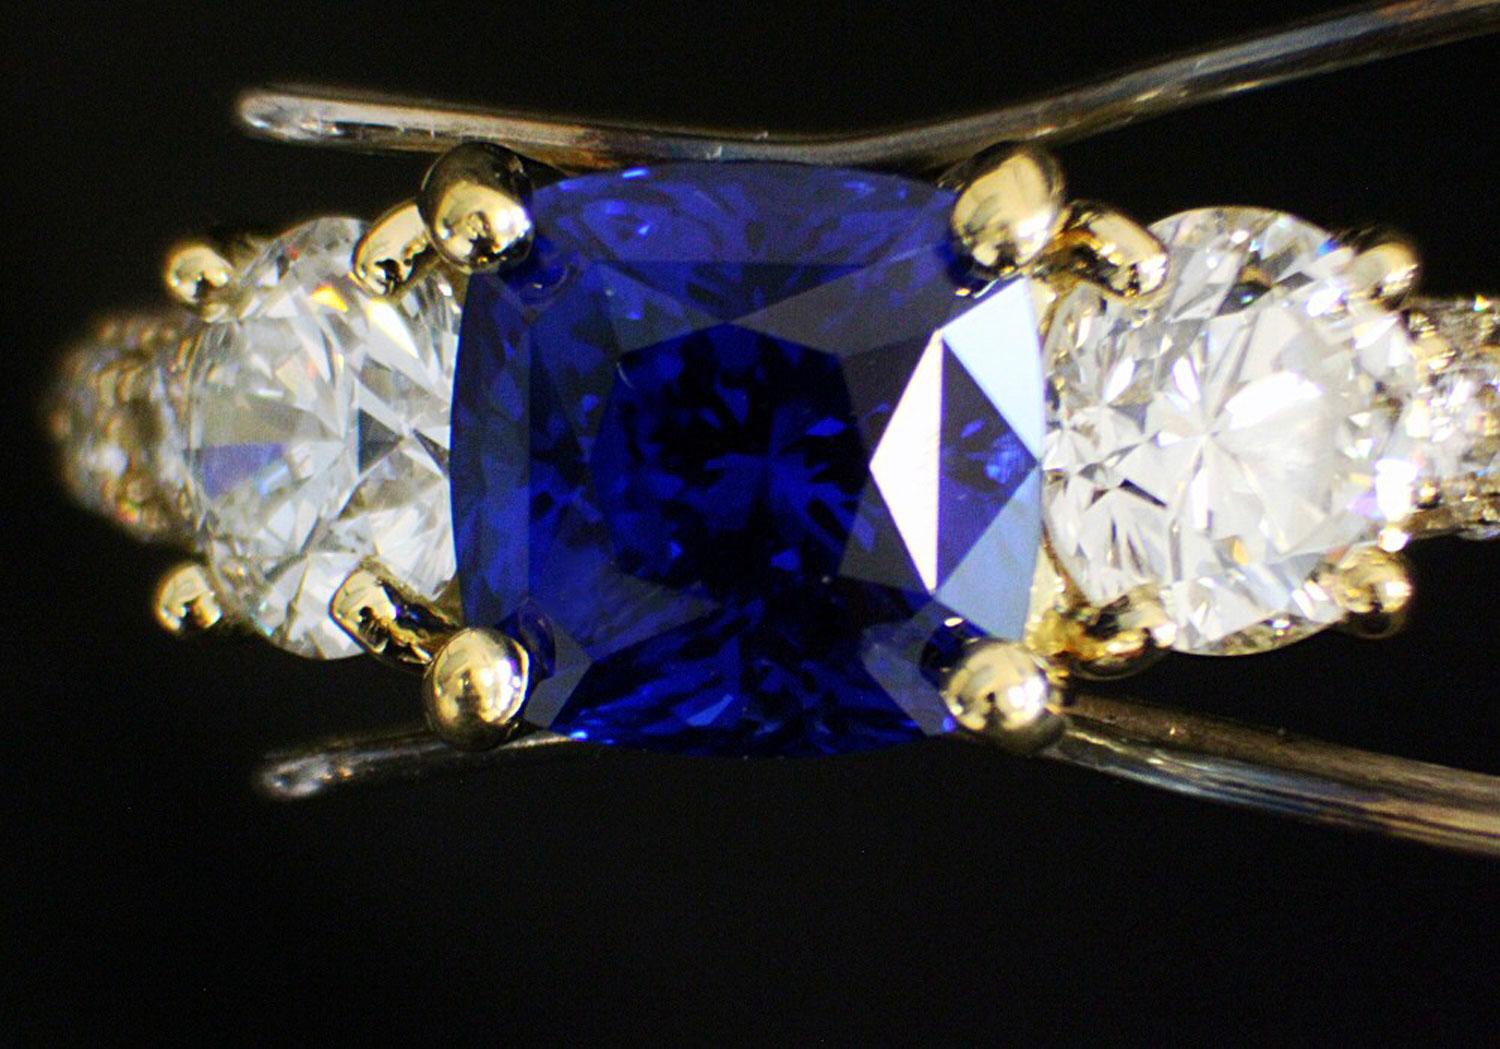 Sapphire Details:

Shape: Square Cushion

Carat Weight: 2.67 Carats

Color: Vivid Electric Royal Blue

Clarity: The light is scattered by the silky Kashmir like inclusions. VS, Very clean and crystal, not milky or foggy looking, 

no inclusions